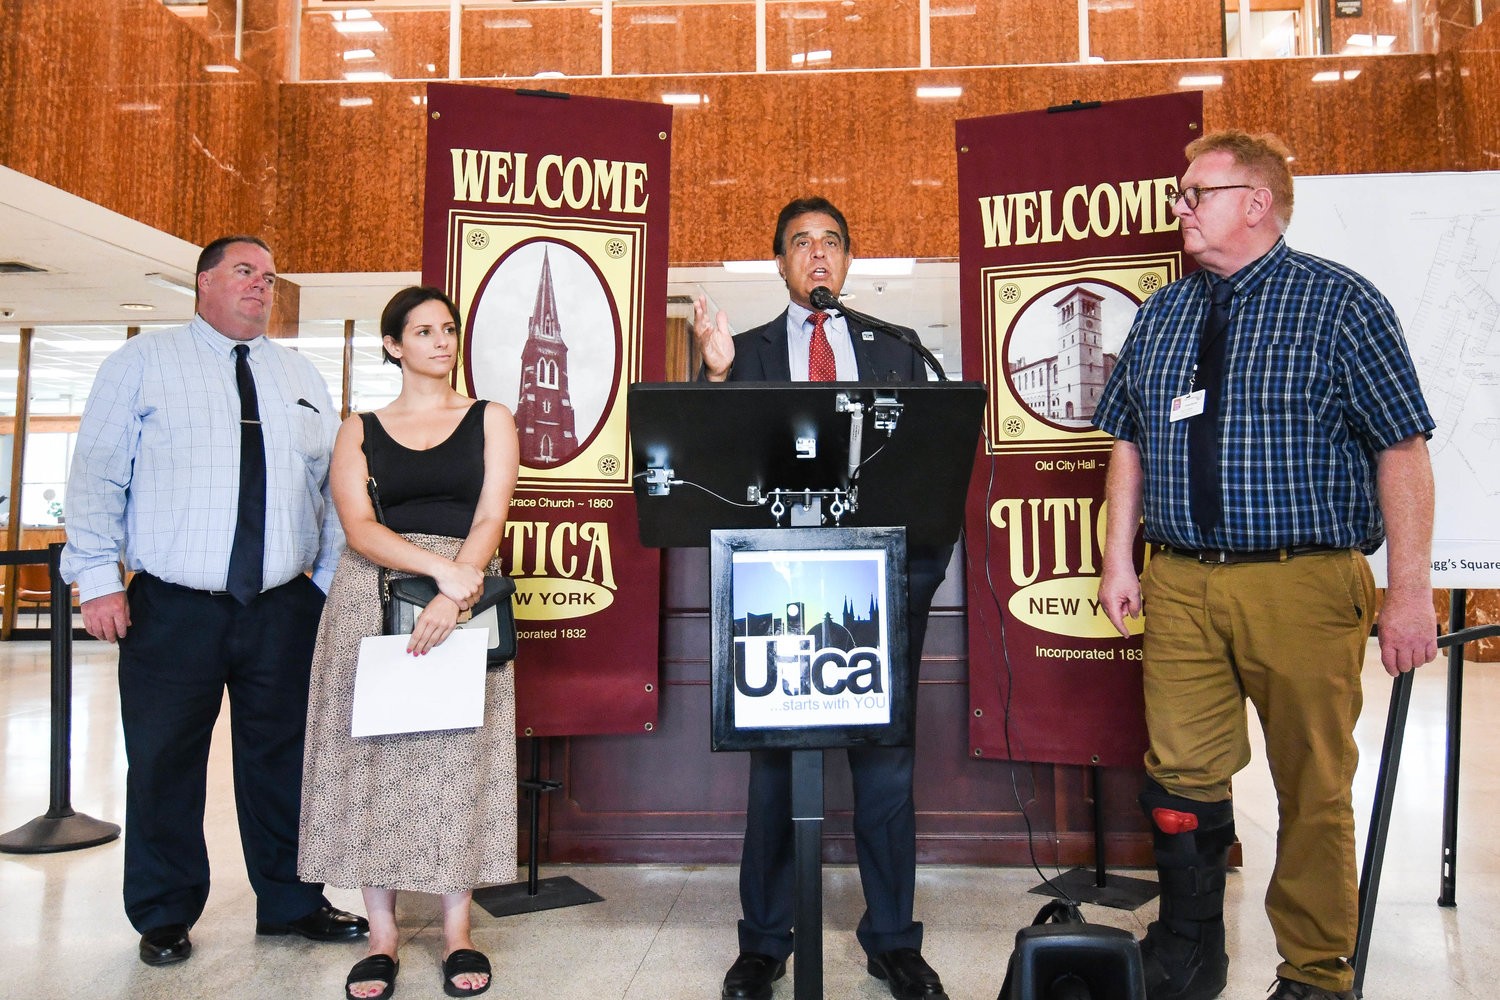 Mayor Robert Palmieri speaks in Utica City Hall on Monday during an announcement for additional parking being added to the Bagg’s Square development under the North Genesee Street bridge.